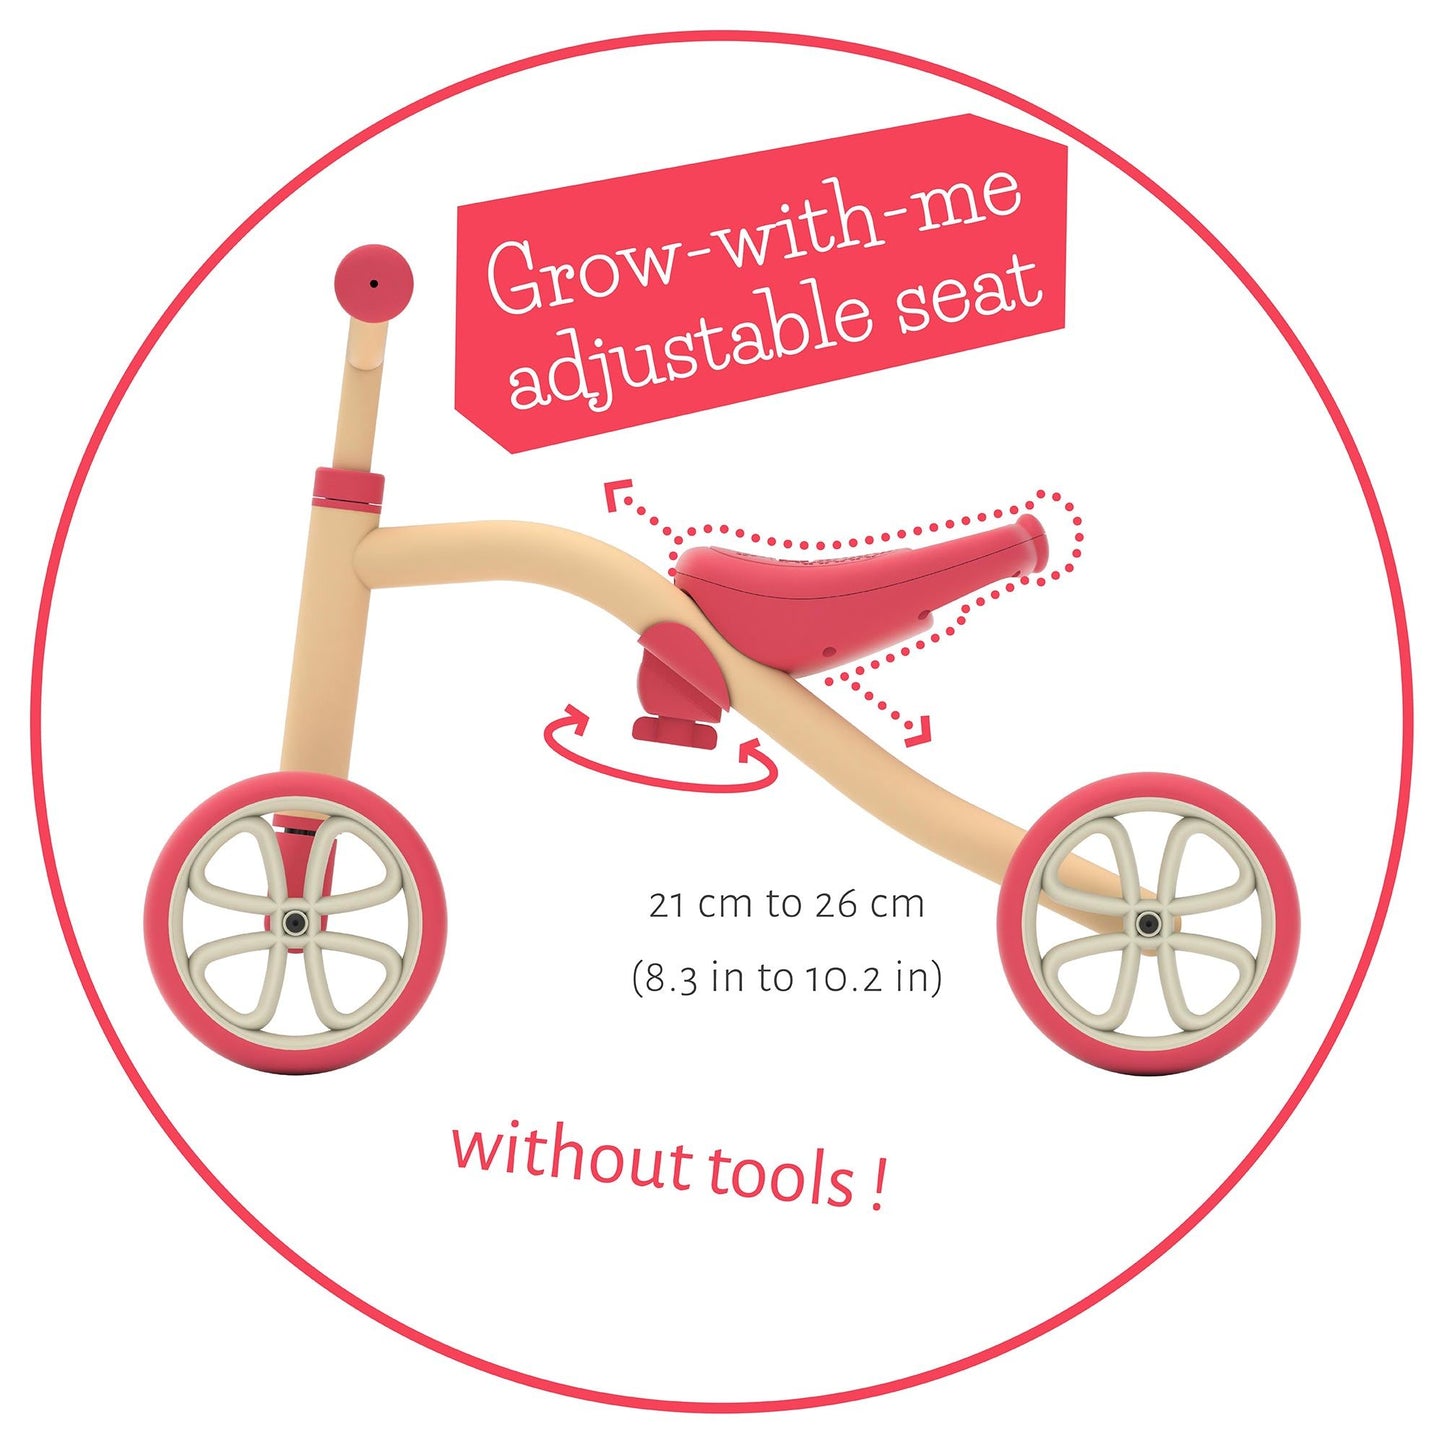 Chillafish Quadie Ride-On Peach with grow with me adjustable seat